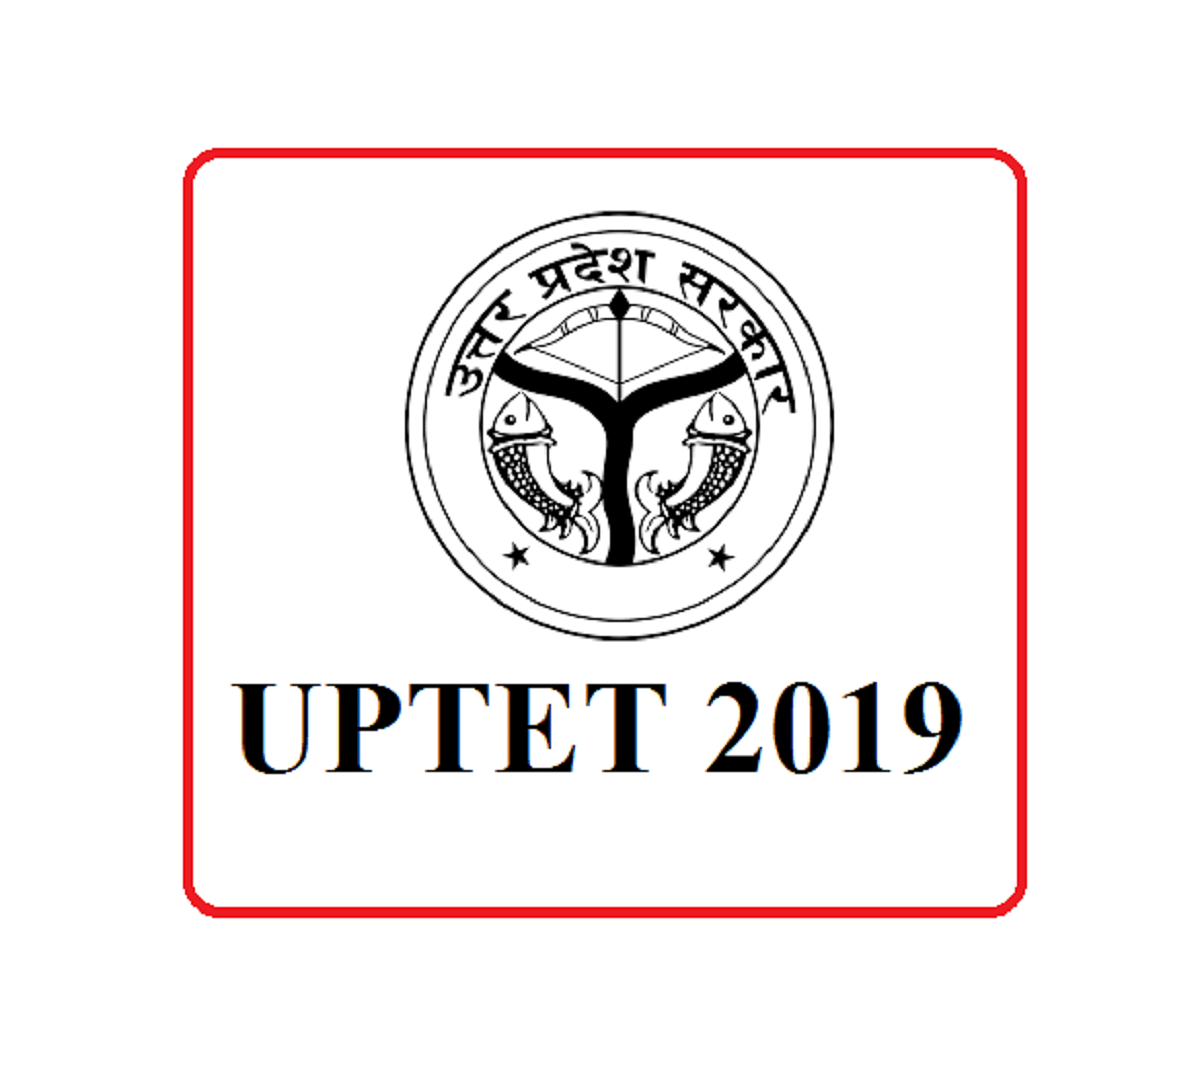 UPTET 2019: Application Process to Begin in November, Check Out the Tentative Exam Schedule Here